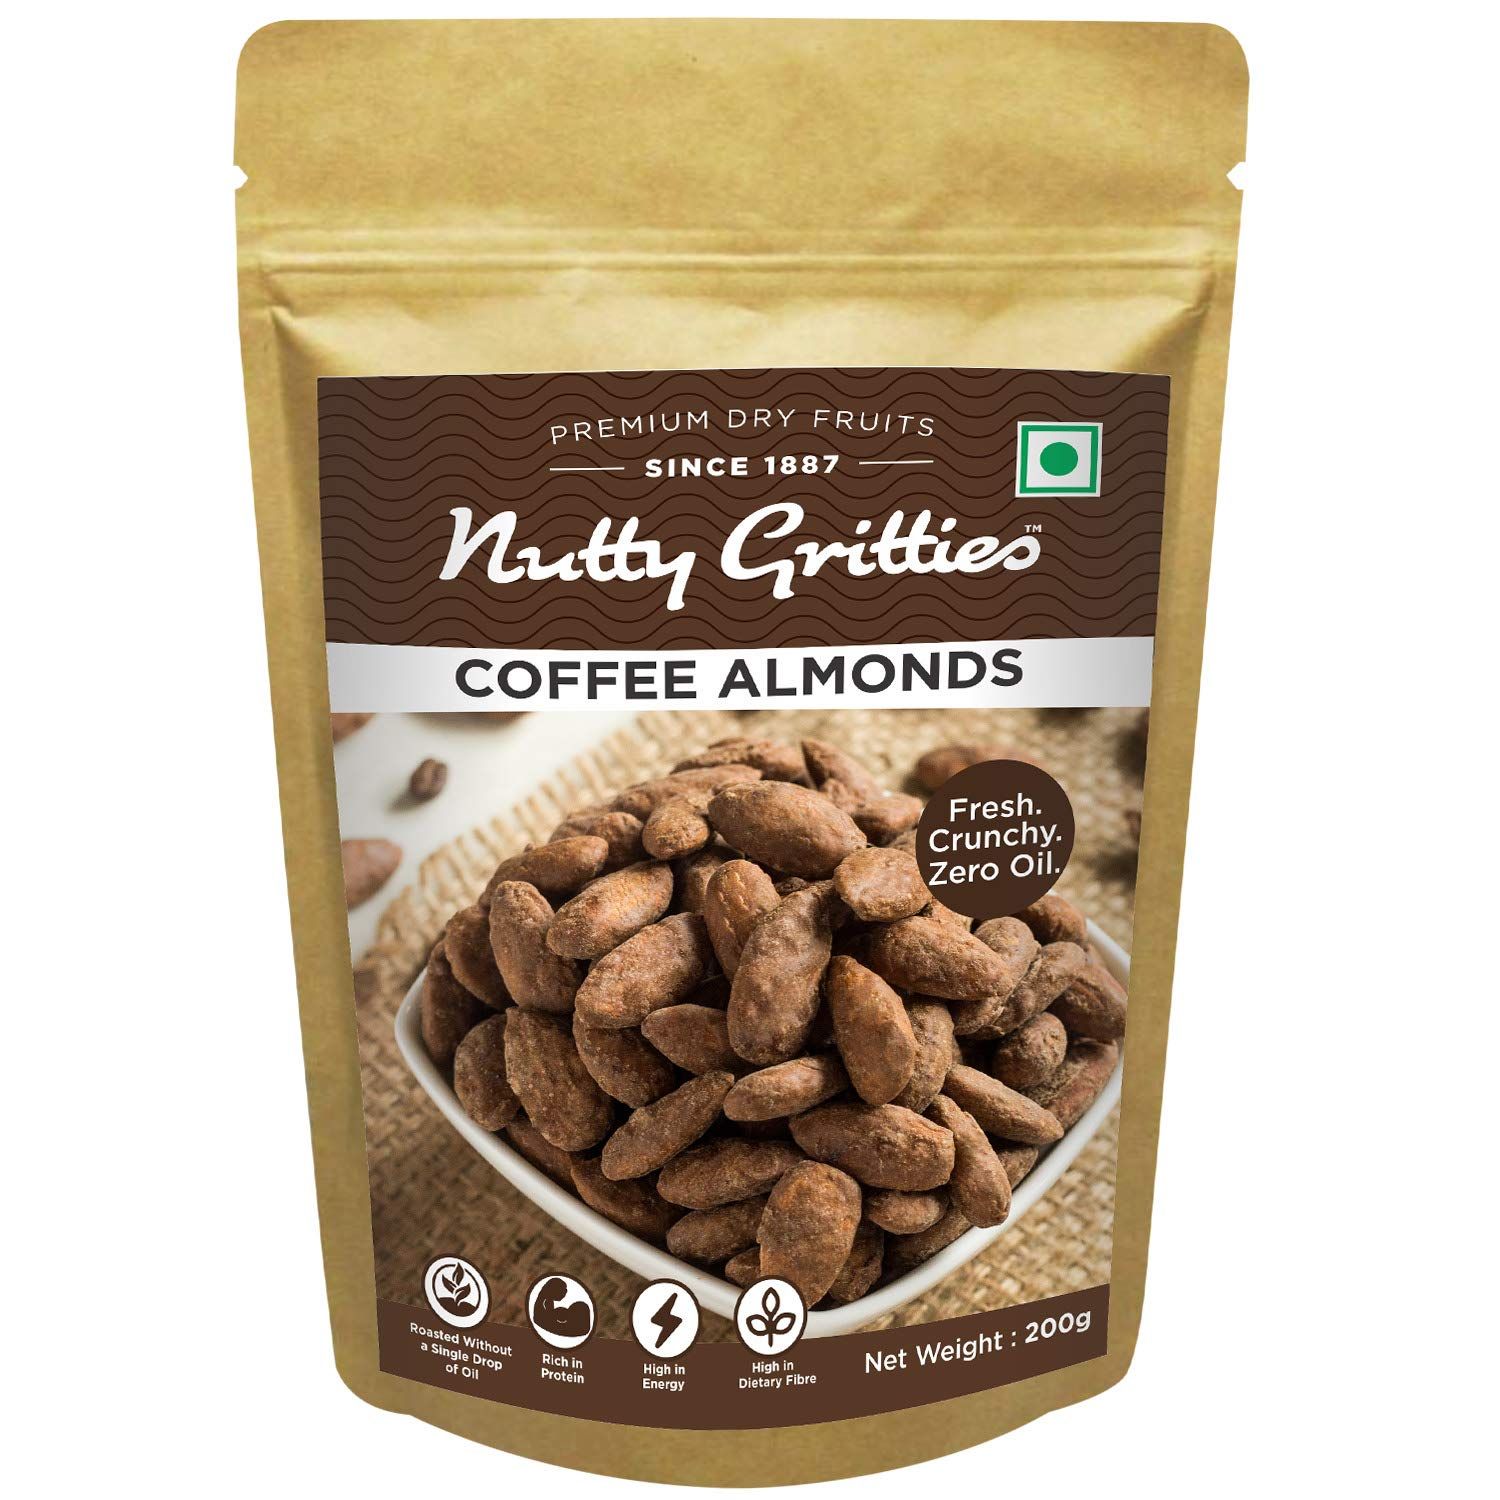 Nutty Gritties Coffee Almonds Image